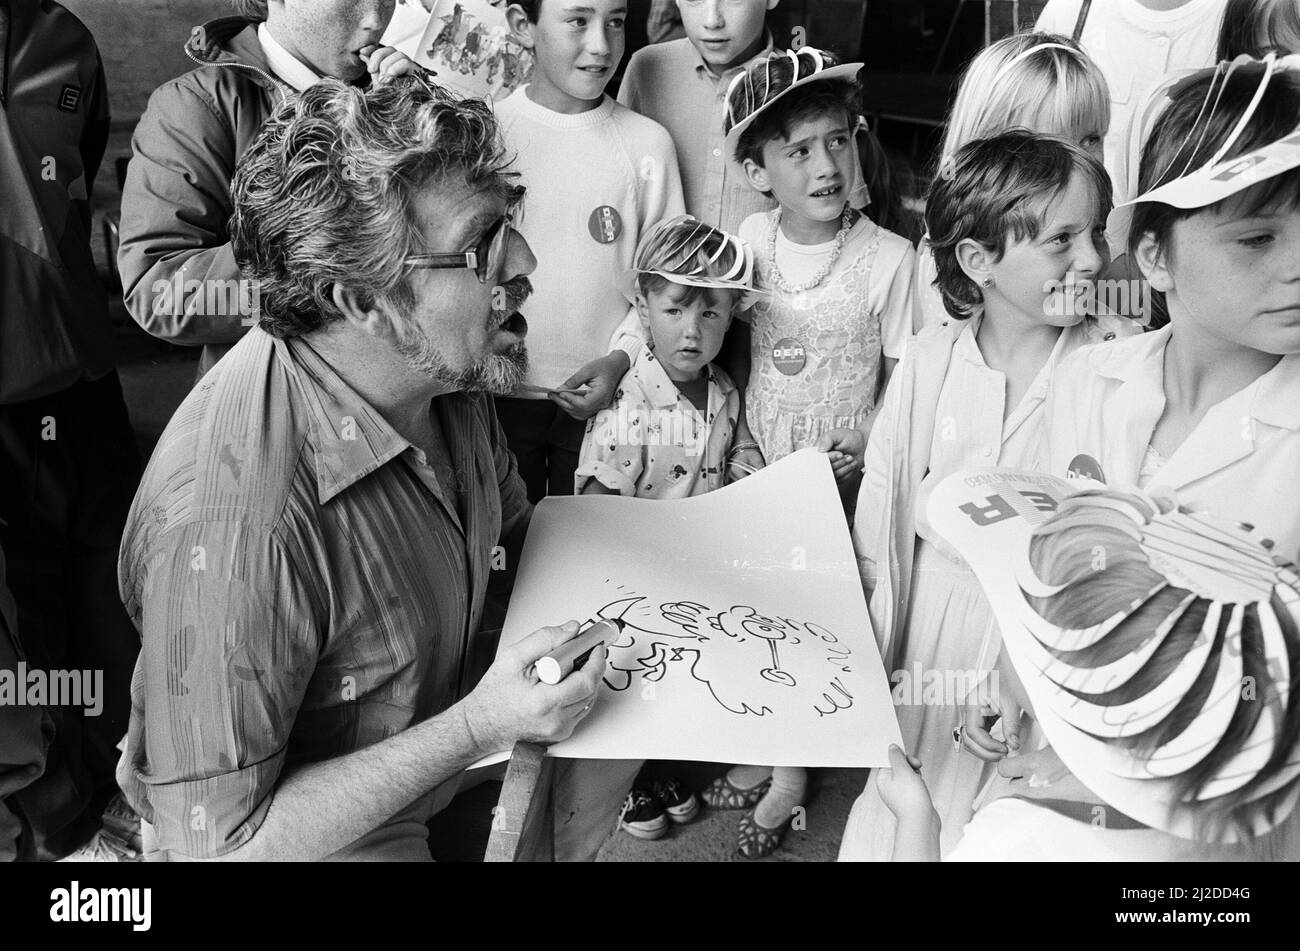 Rolf Harris, drawing sketches as he entertains children at Albert Dock, Liverpool, 13th July 1986. Stock Photo